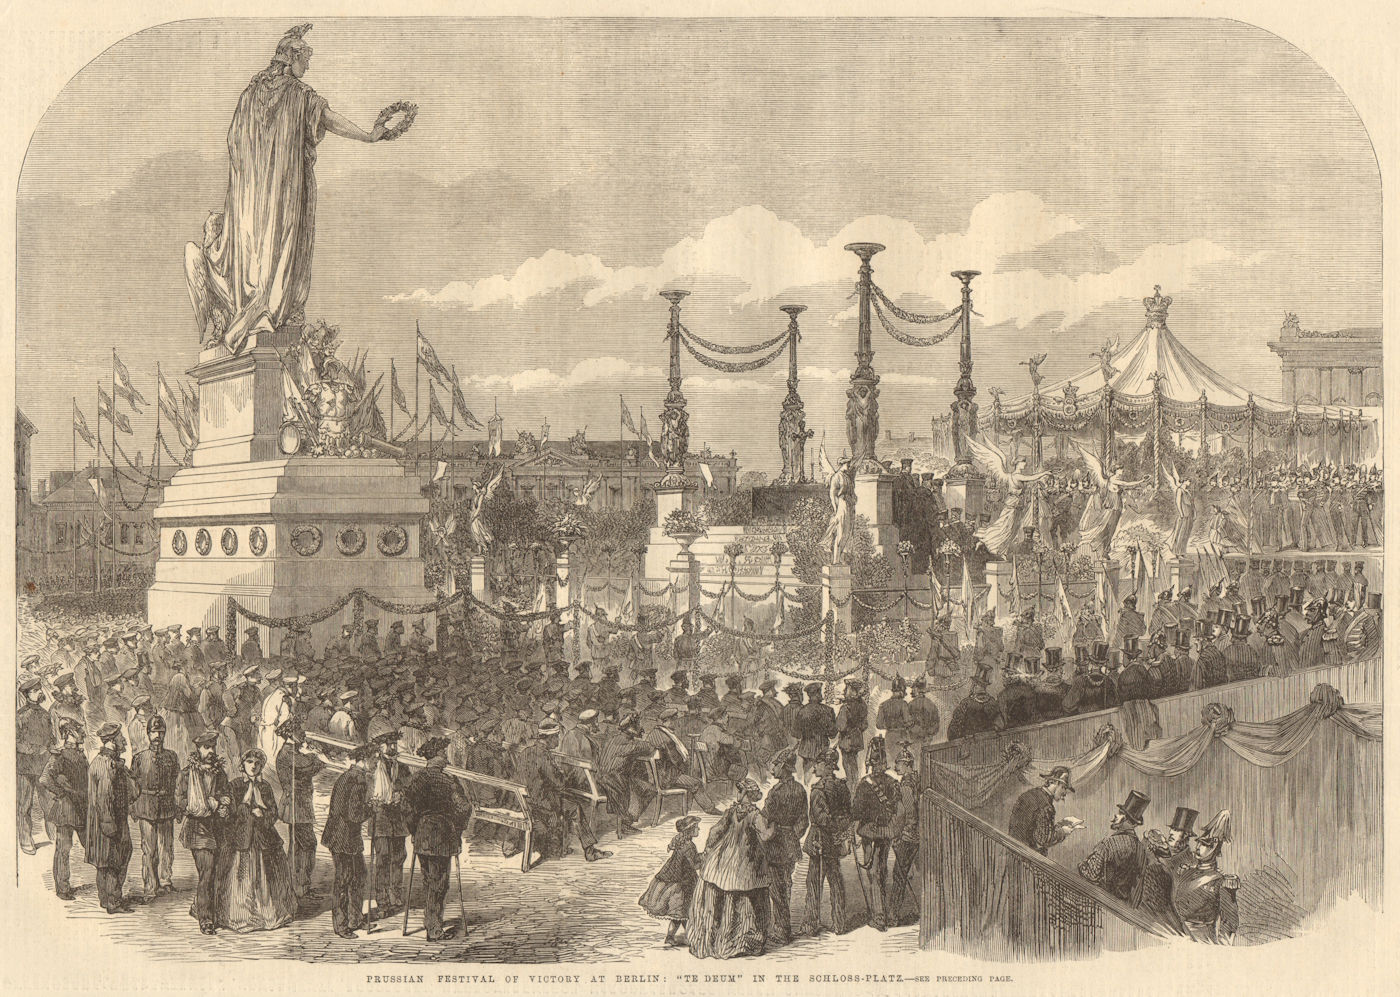 Associate Product Prussian festival of victory at Berlin: "Te deum" in the Schloss-Platz 1866